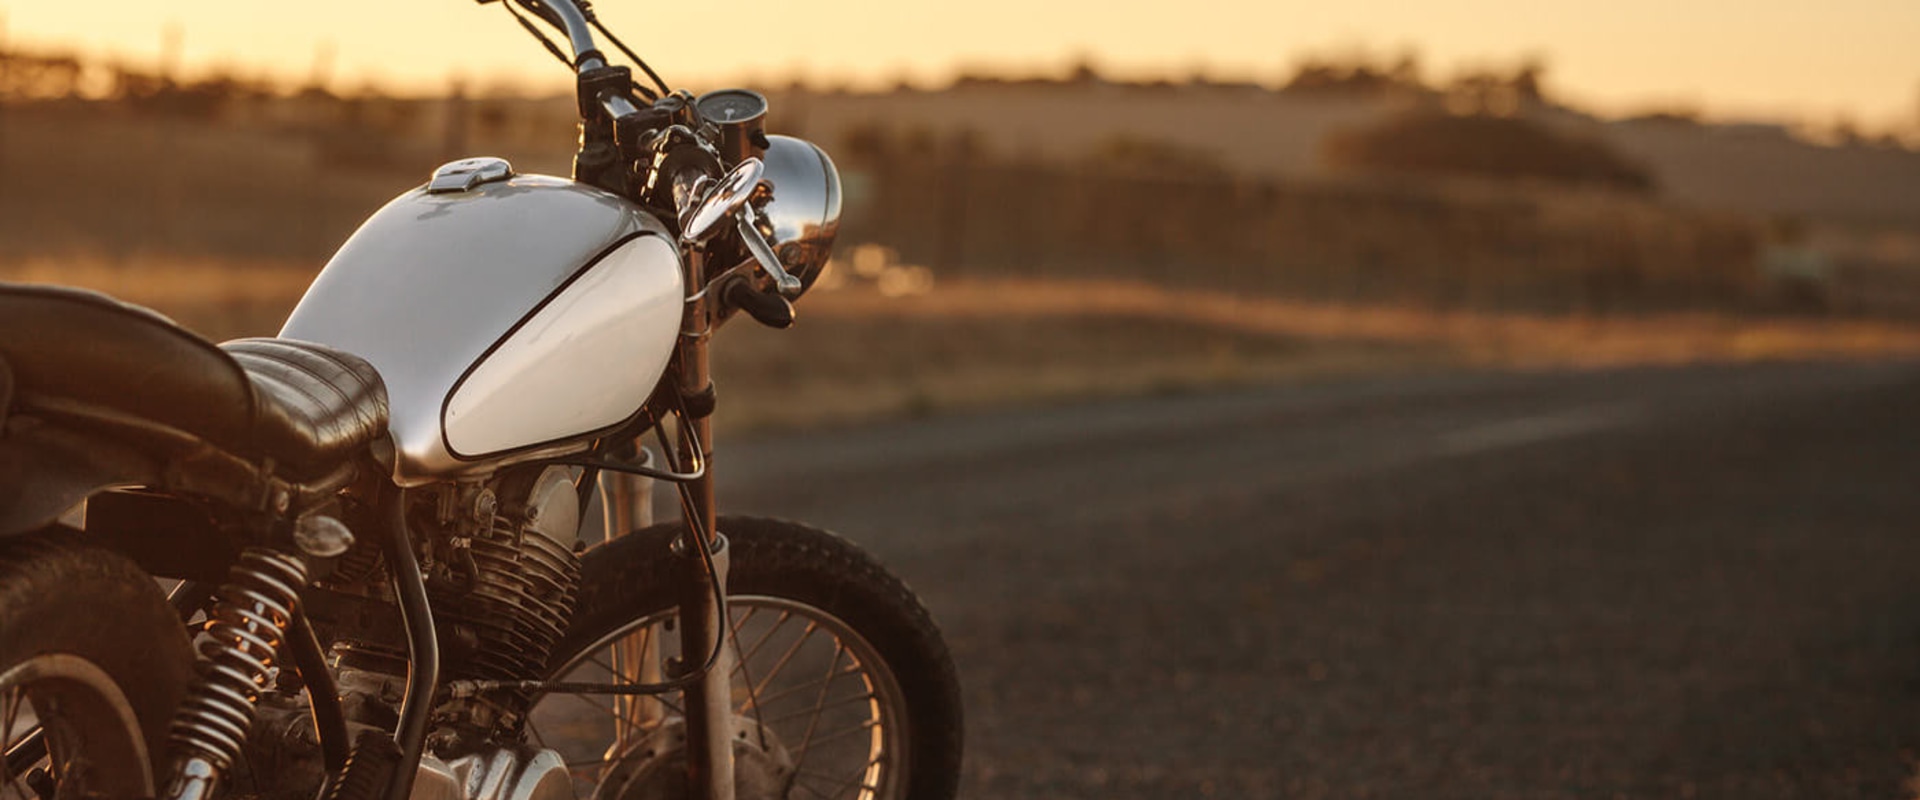 Does Motorcycle Insurance Cover Aftermarket Parts?